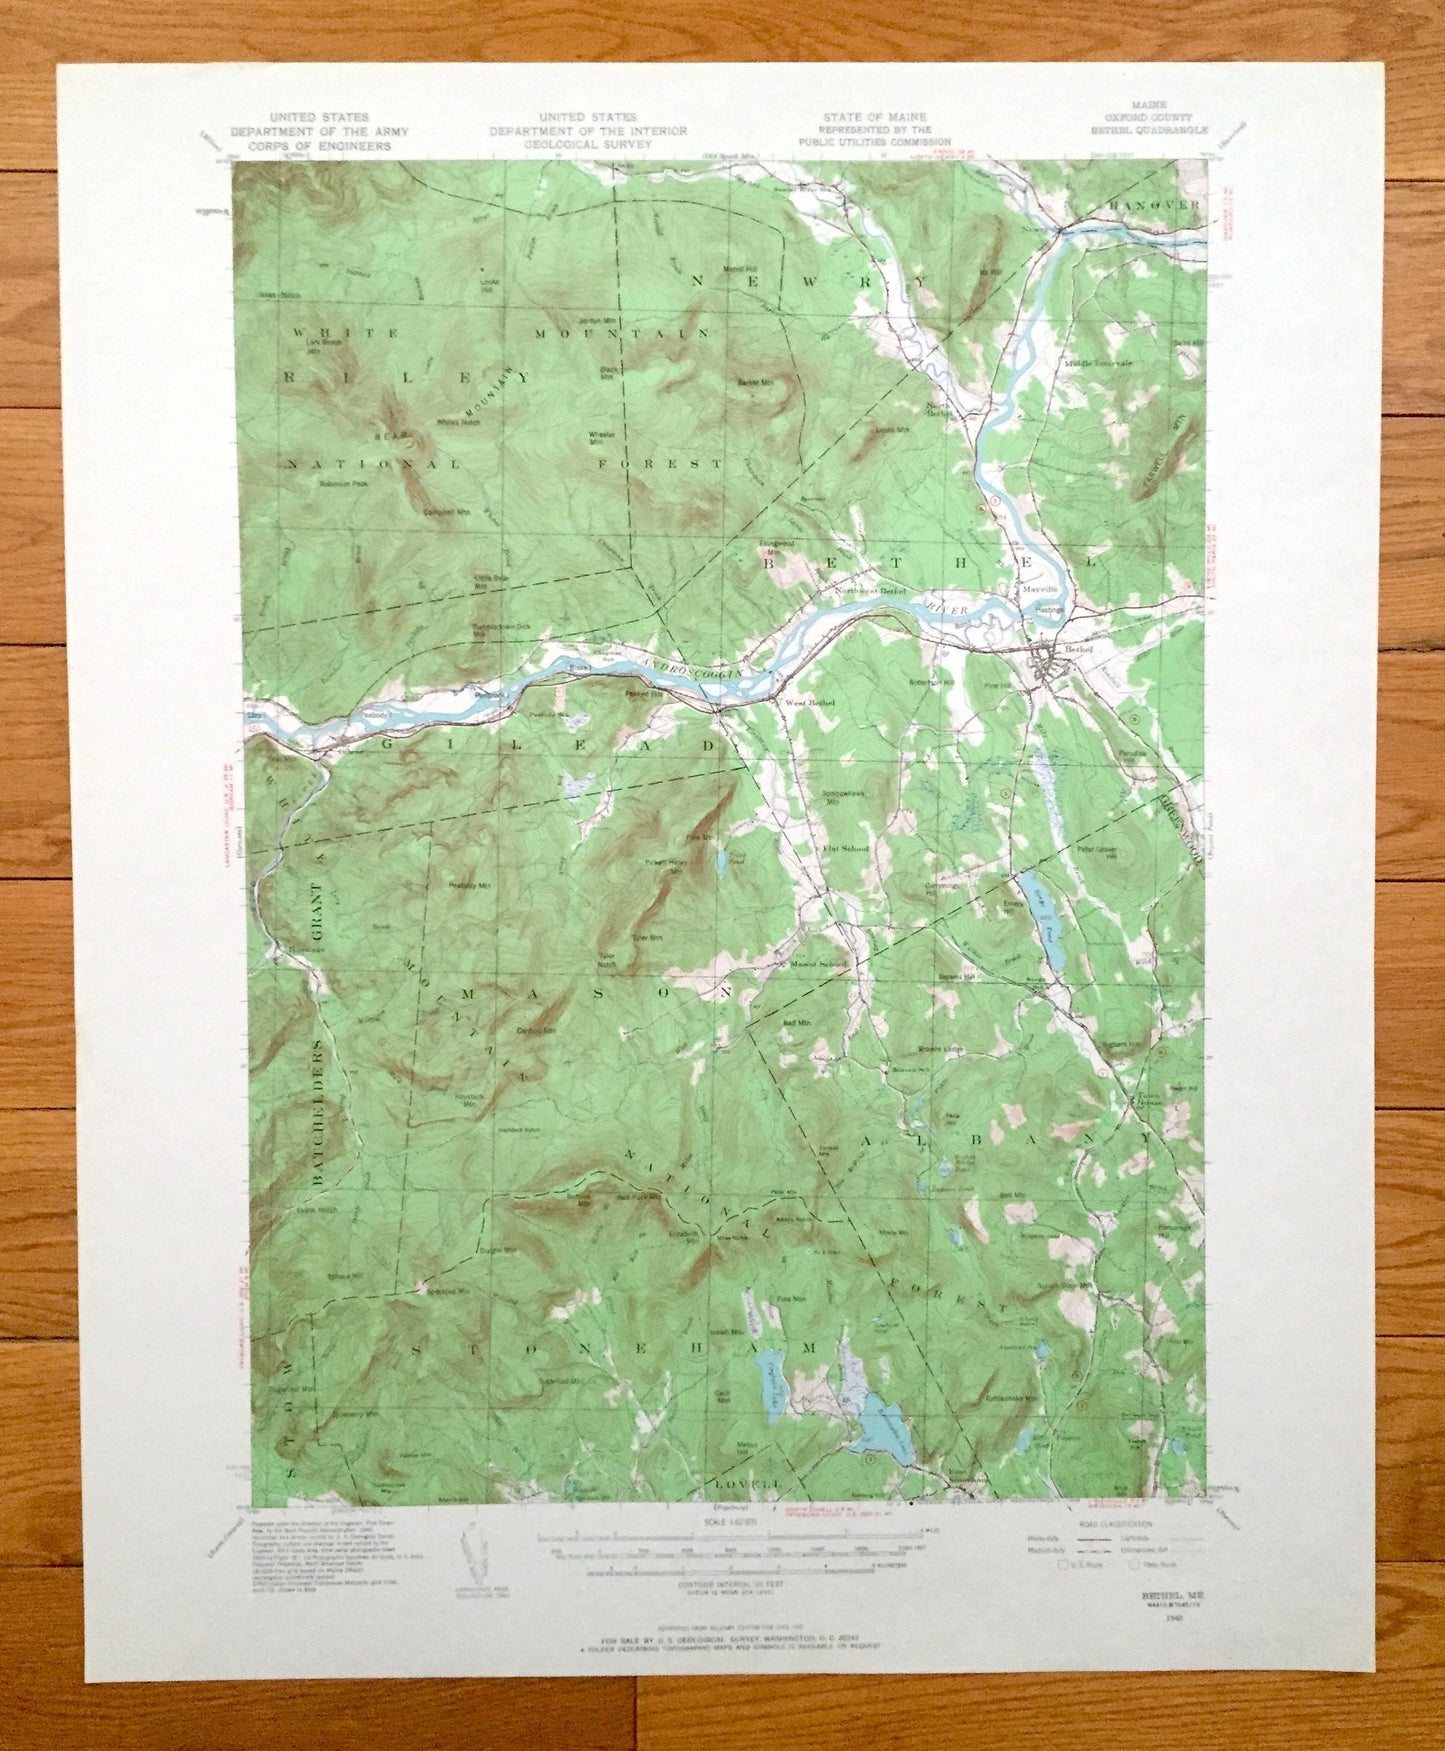 Antique Bethel, Maine 1940 US Geological Survey Topographic Map – Hanover, Newry, Gilead, Albany, Stoneham, Oxford, Cumberland County, ME